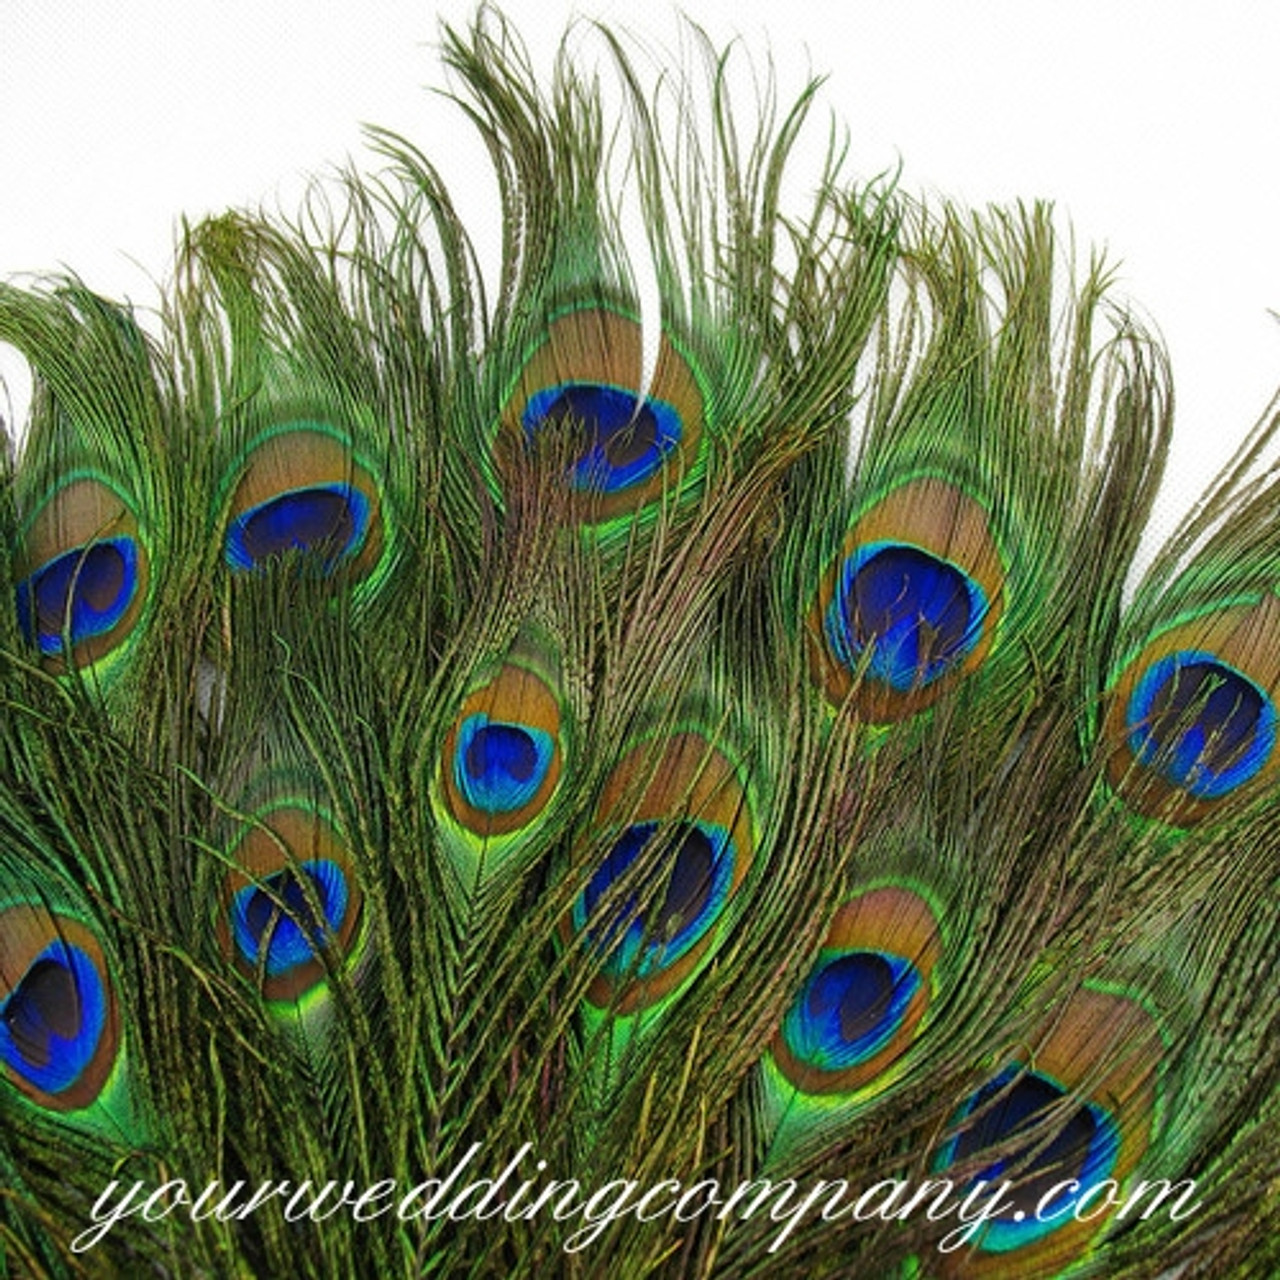 Sparkling Peacock Feather